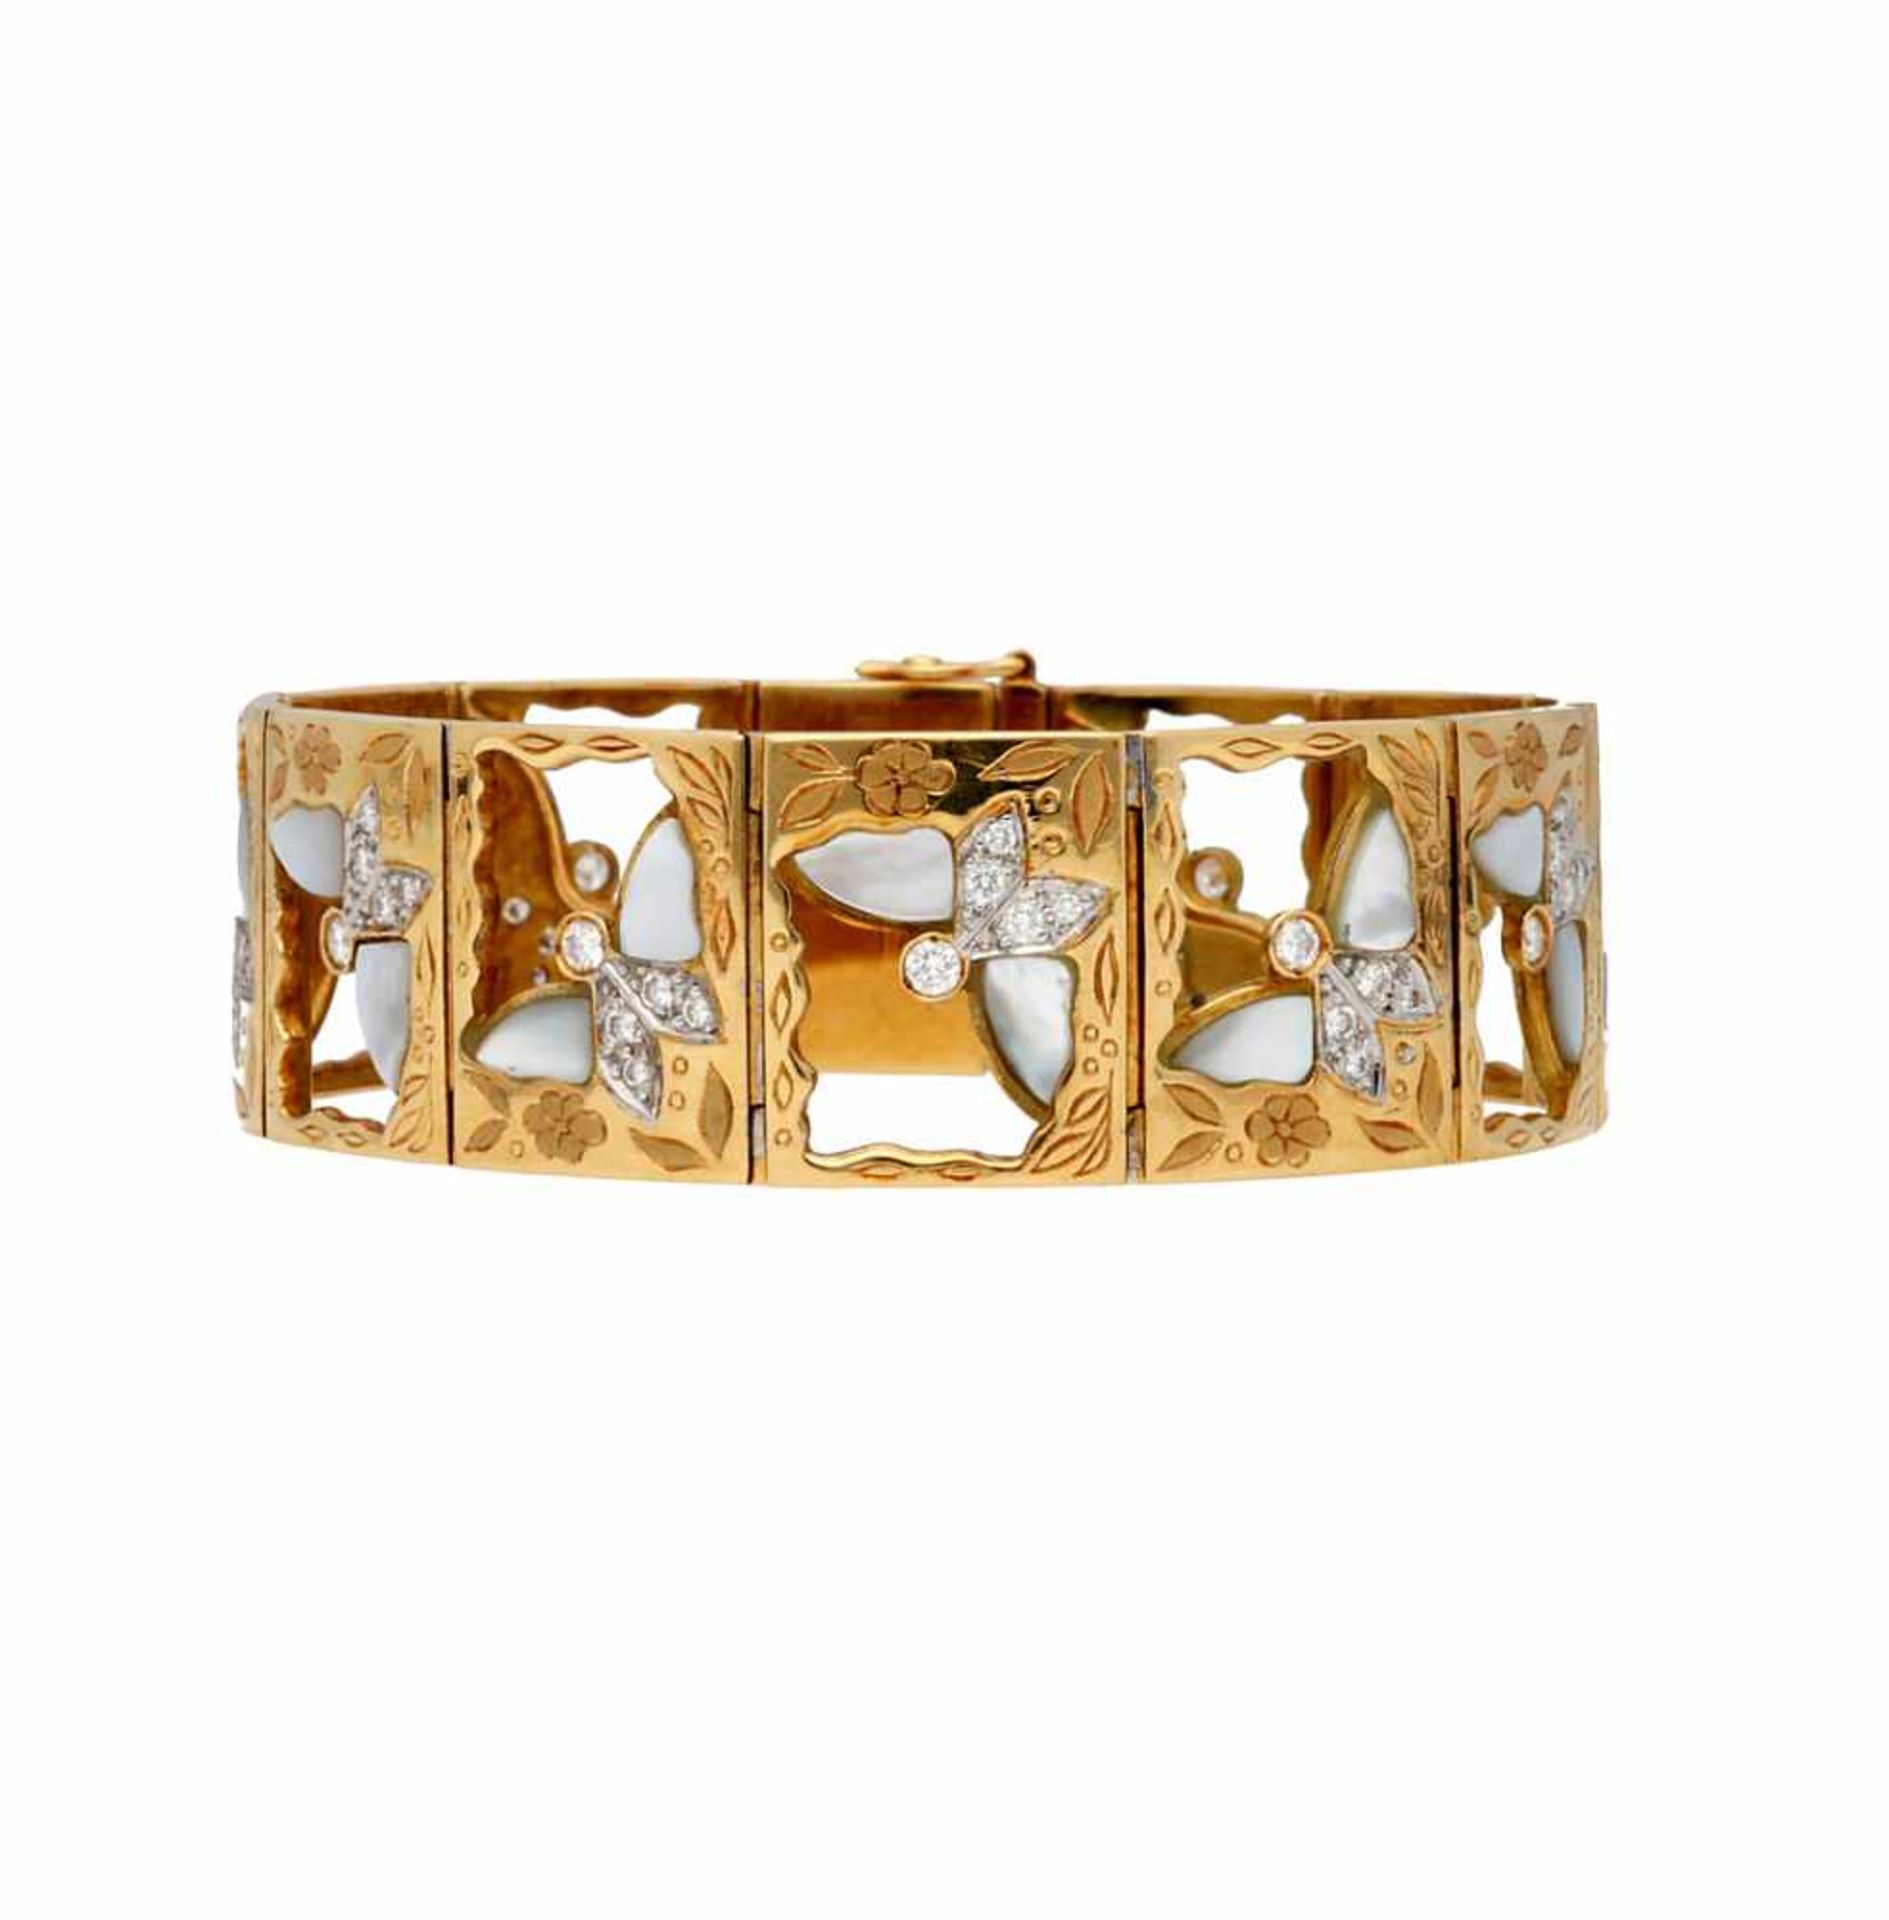 PUIG DORIA. Gold and mother-of-pearl bracelet.Chiselled gold, brilliant cut diamonds, 0.55 cts and